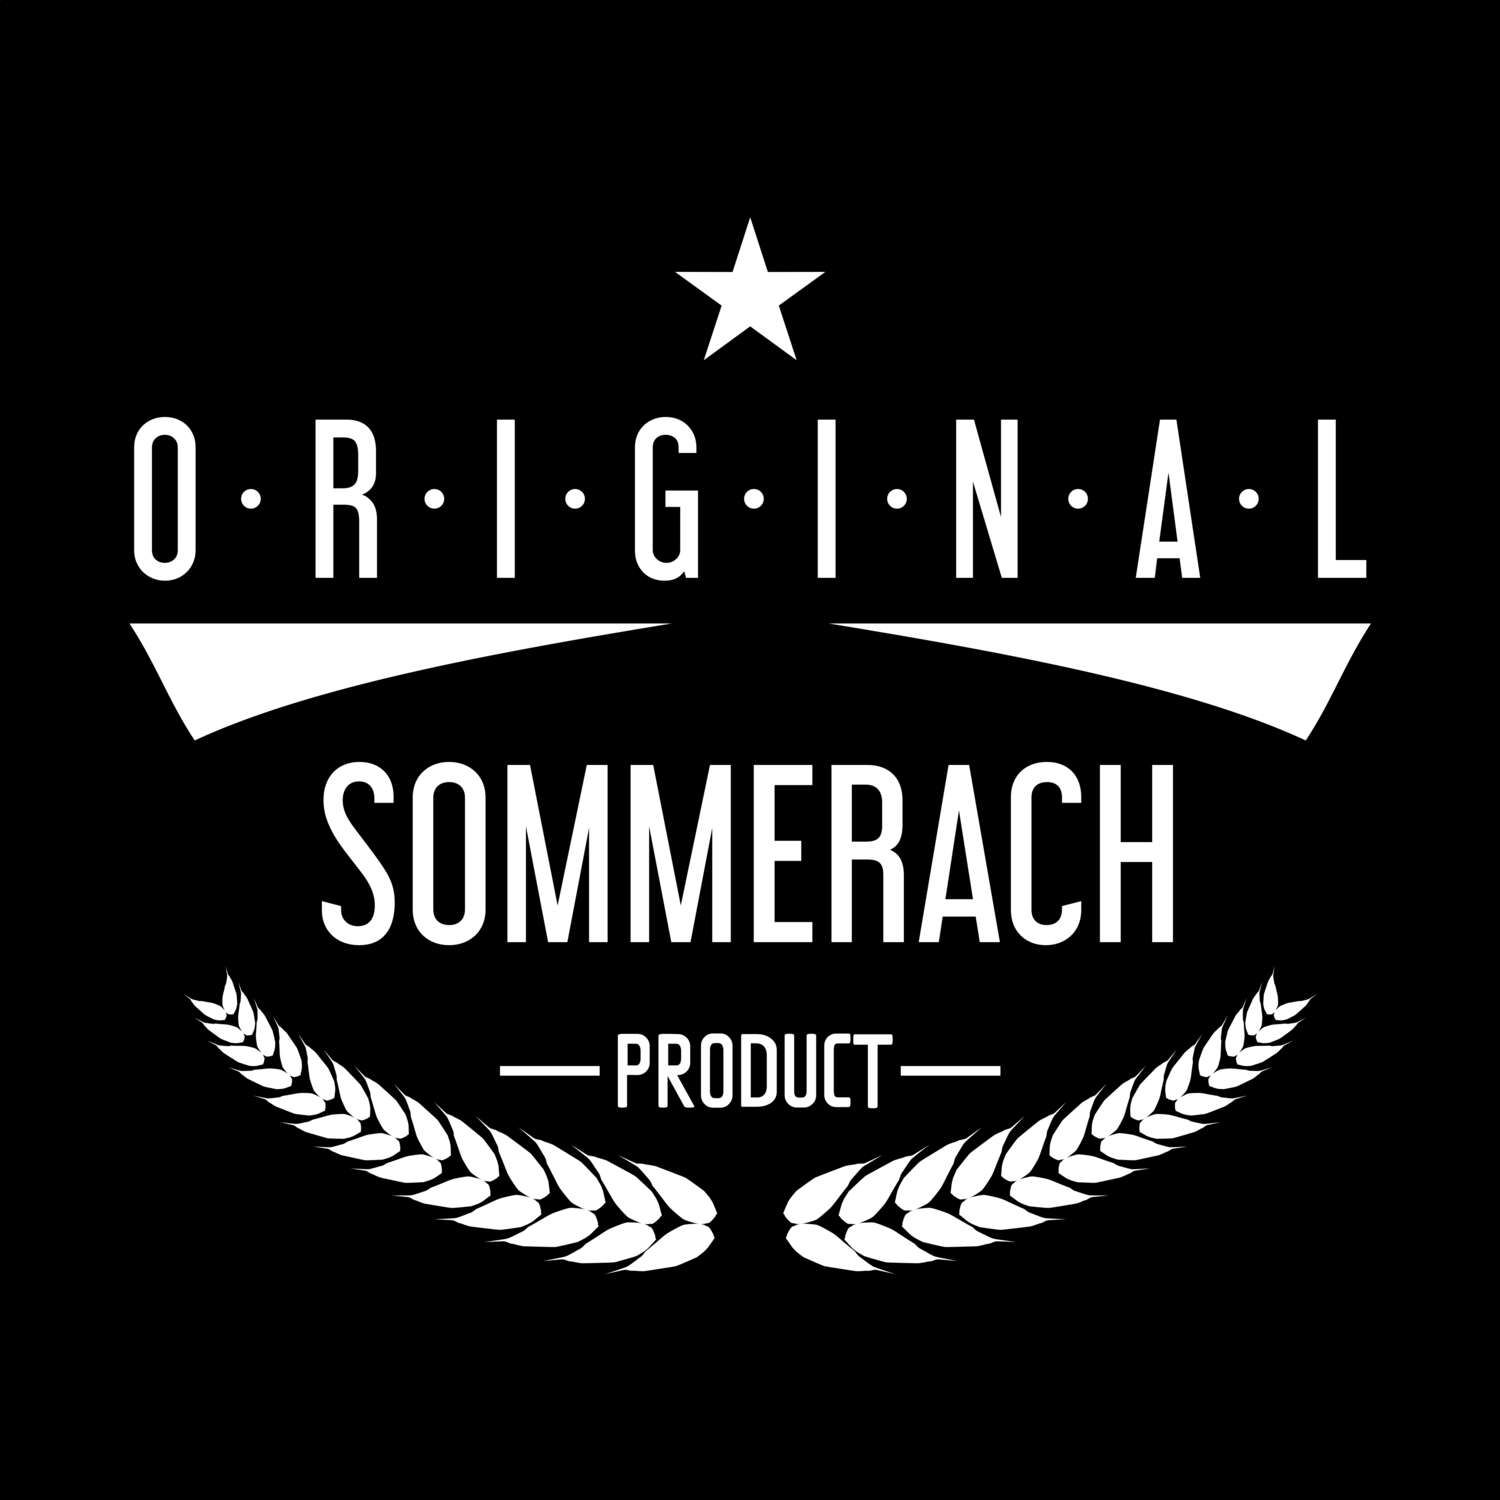 Sommerach T-Shirt »Original Product«